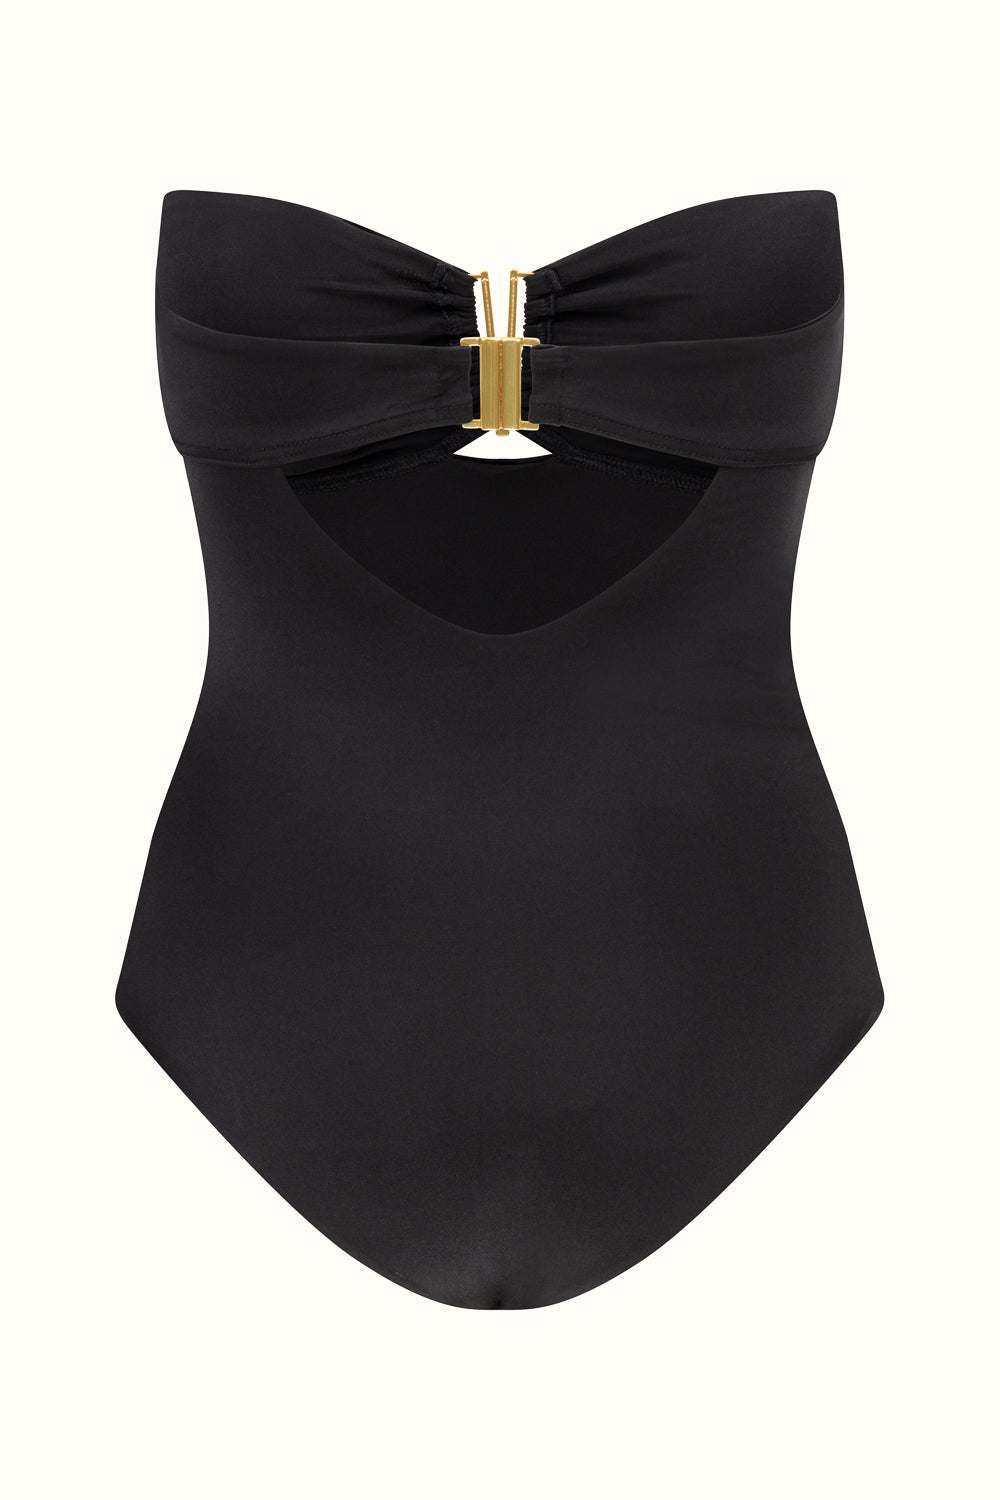 The Strapless Swimsuit